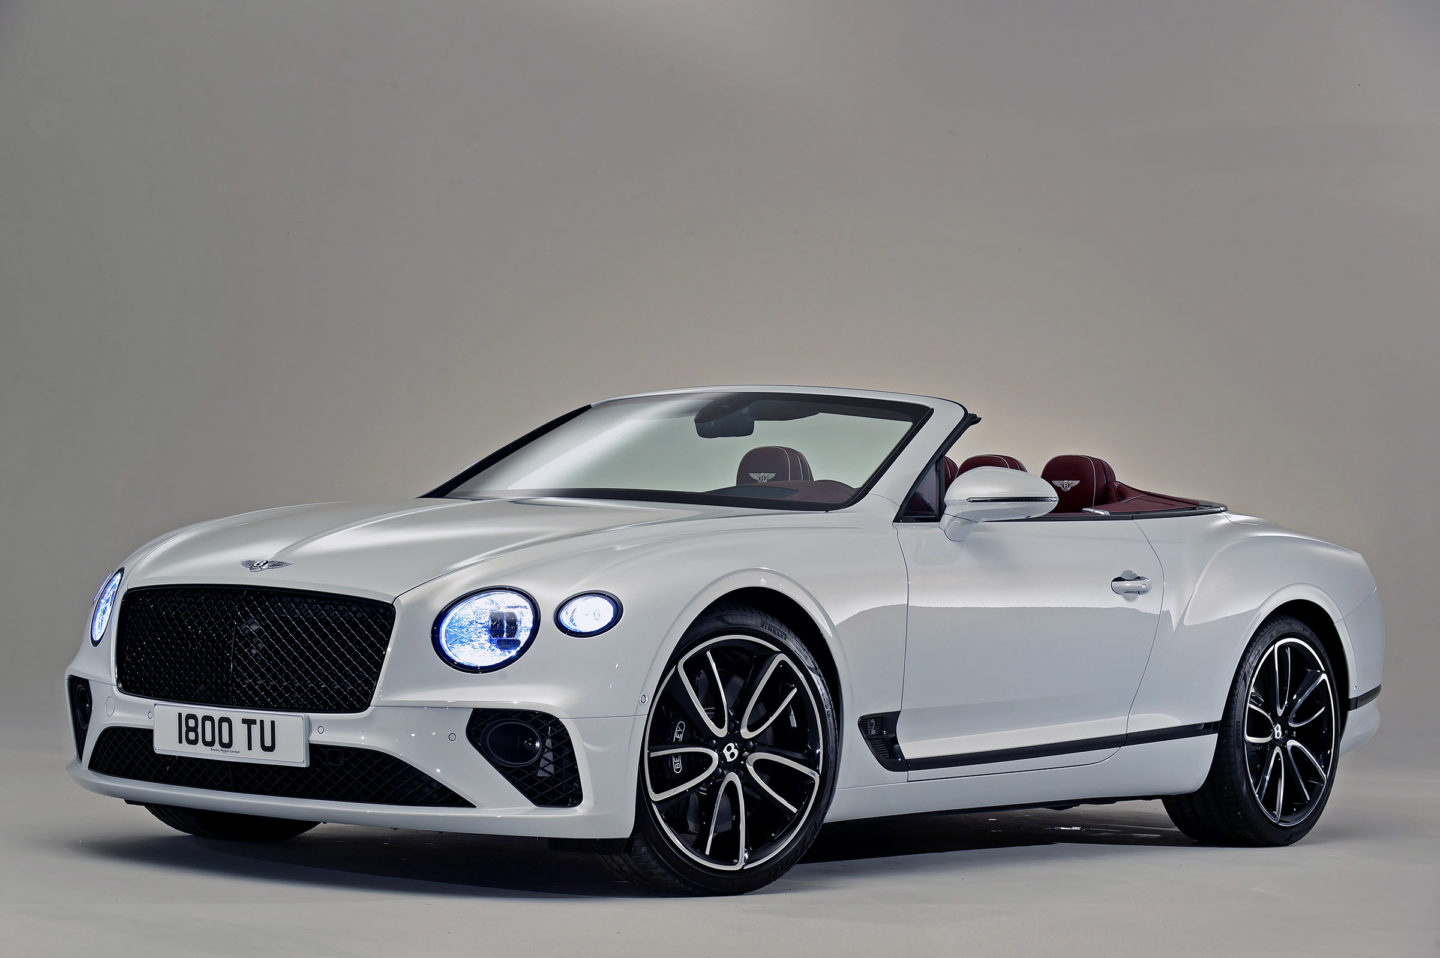 New Bentley Continental GT Convertible 2019 – see why it’s worth £175,000